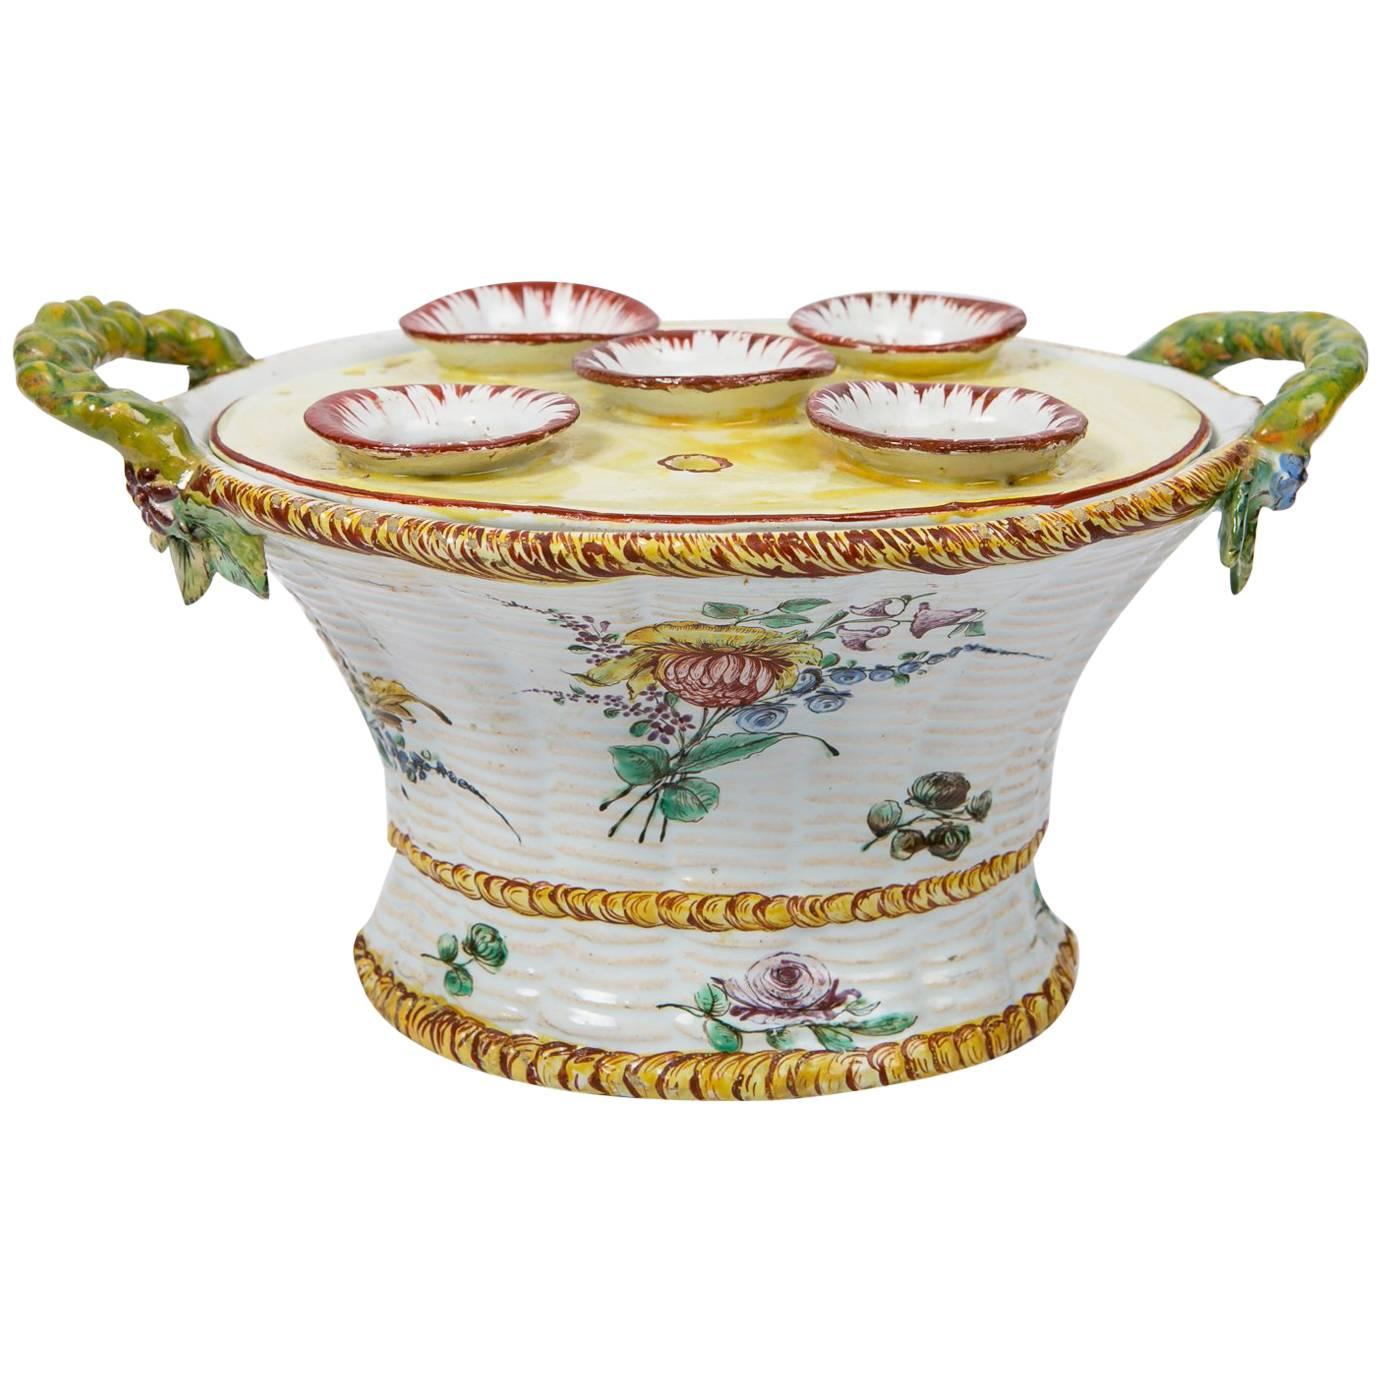 Faience Planter or Bough Pot Made in France circa 1820